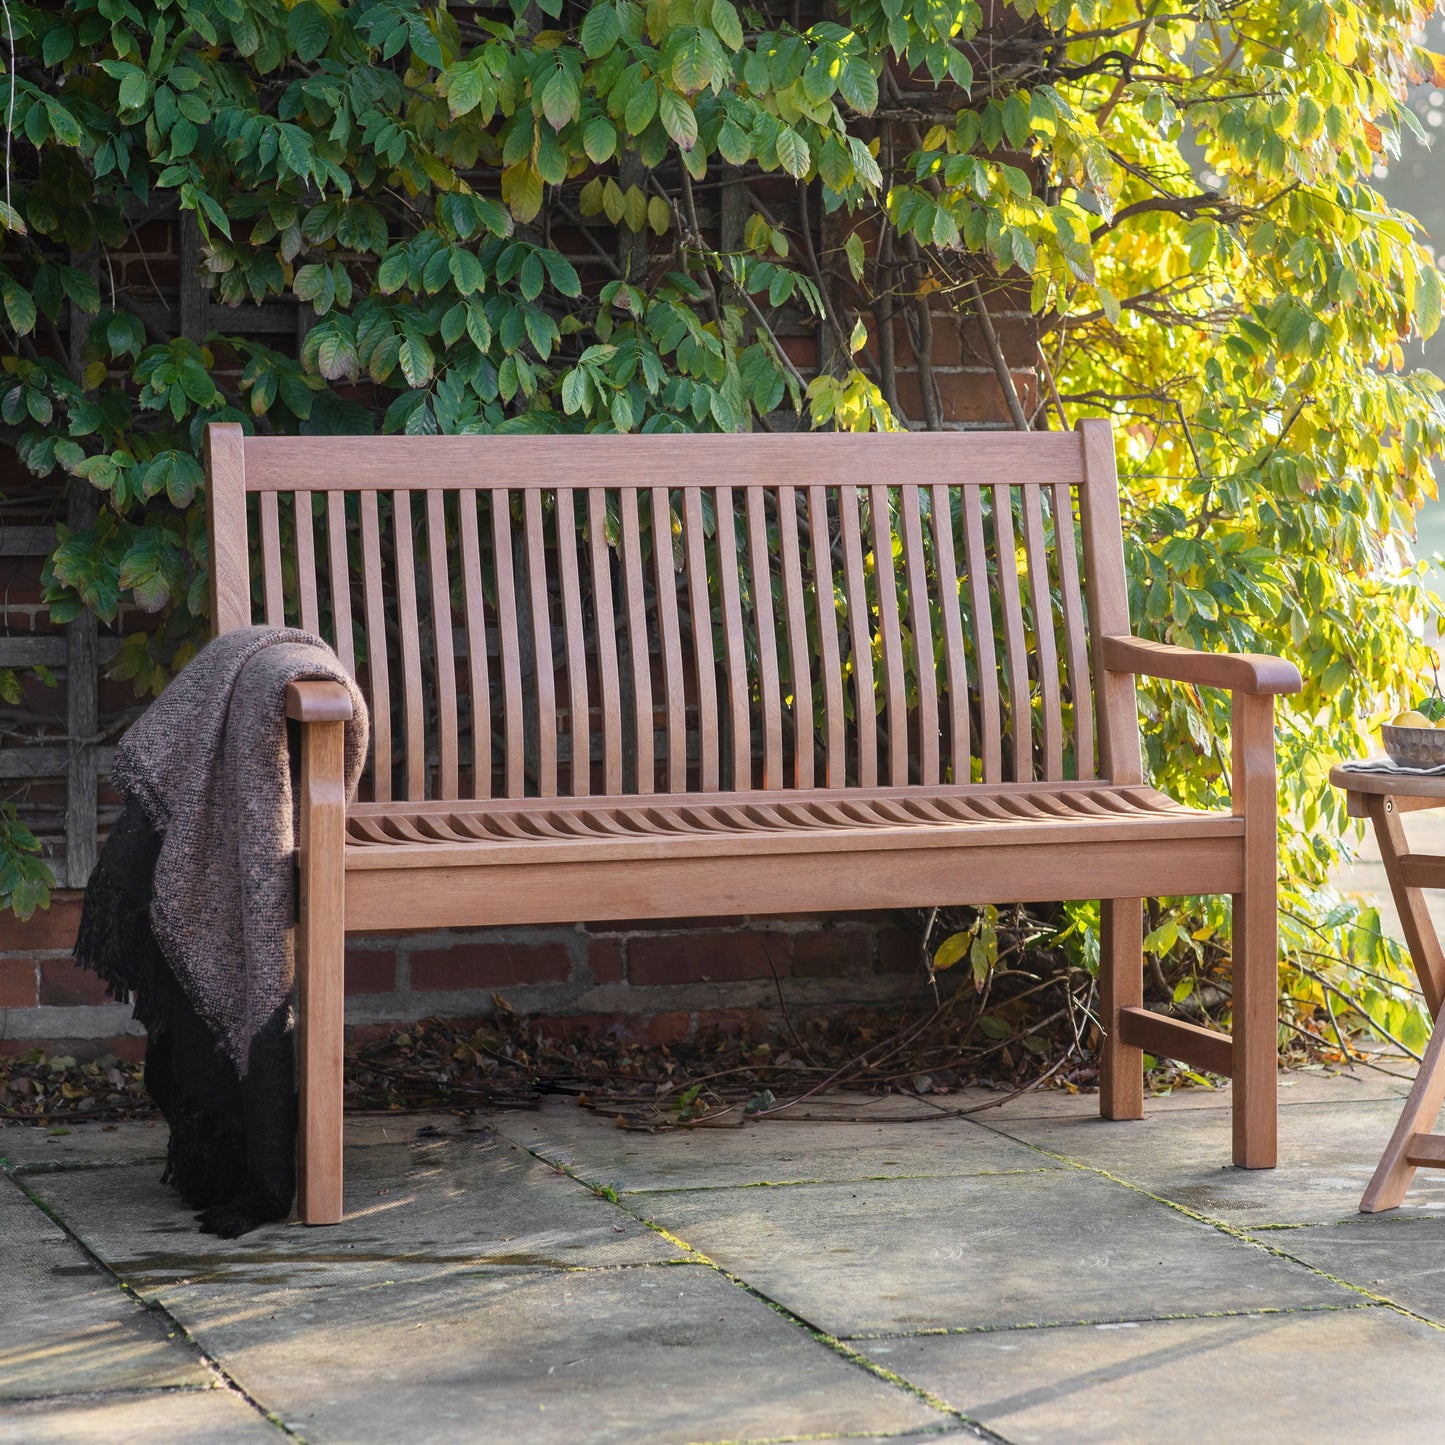 A Lustleigh Outdoor Bench with blanket, perfect for interior decor.